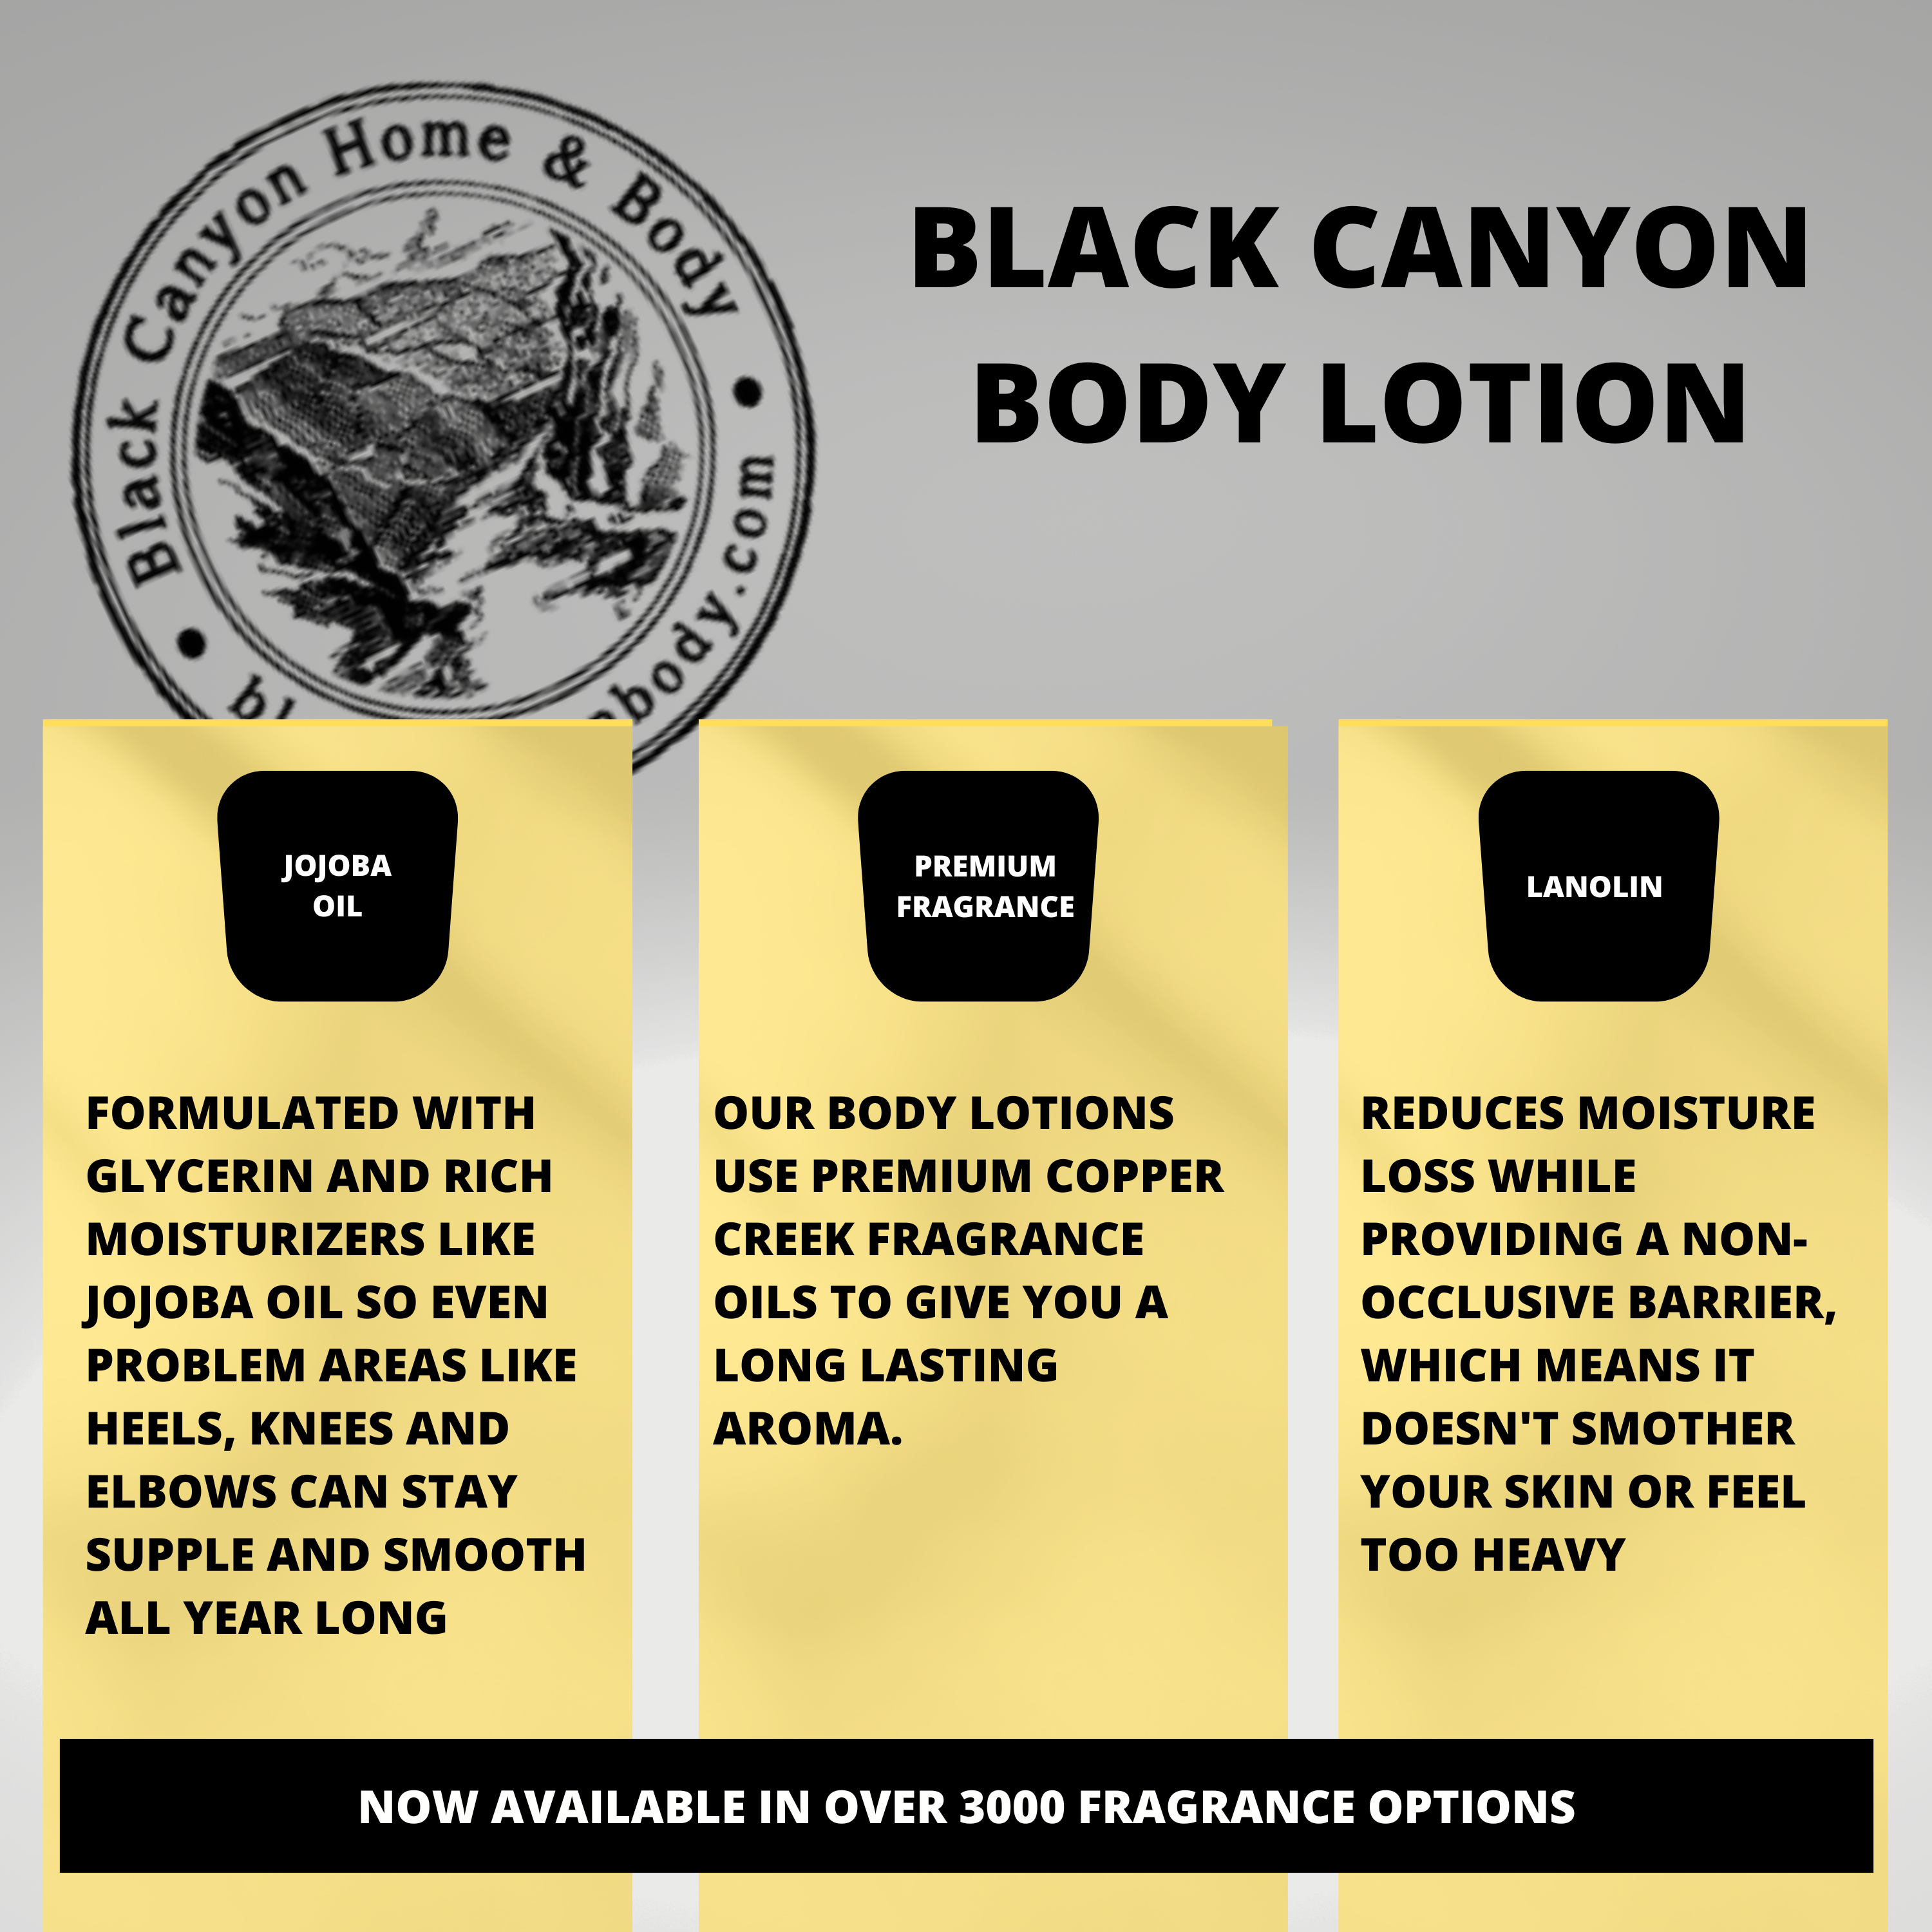 Black Canyon Creme Brulee Scented Luxury Body Lotion with Lanolin and Jojoba Oil